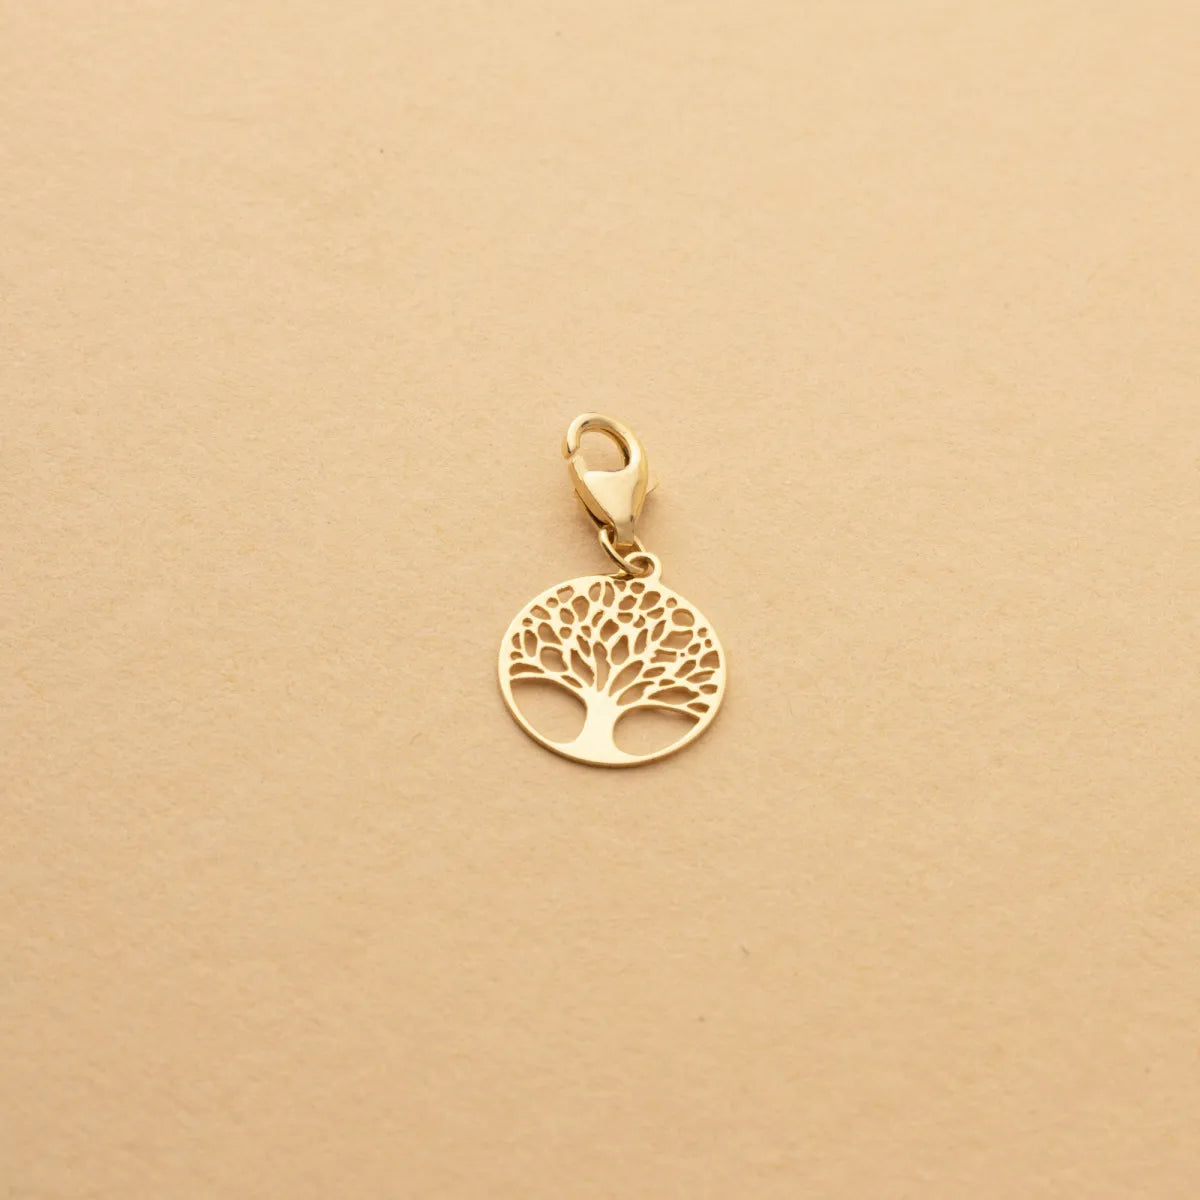 14ct Tree of Life charm pendant in yellow gold